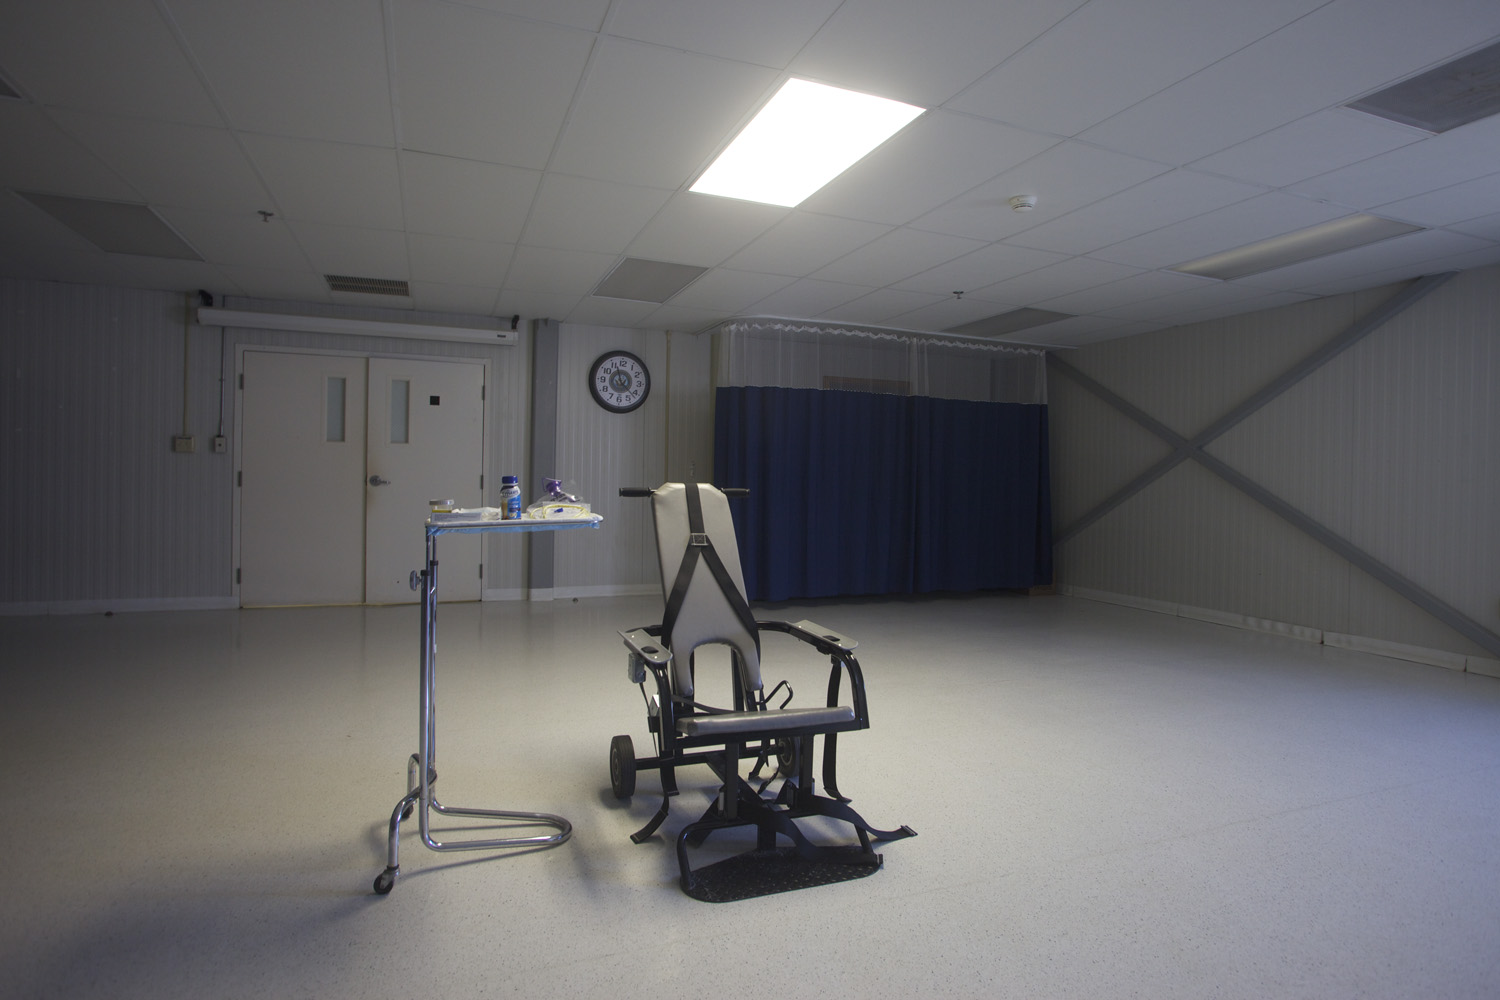 The restraining chair and forced feeding apparatus on display in an empty room of the detainee hospital.